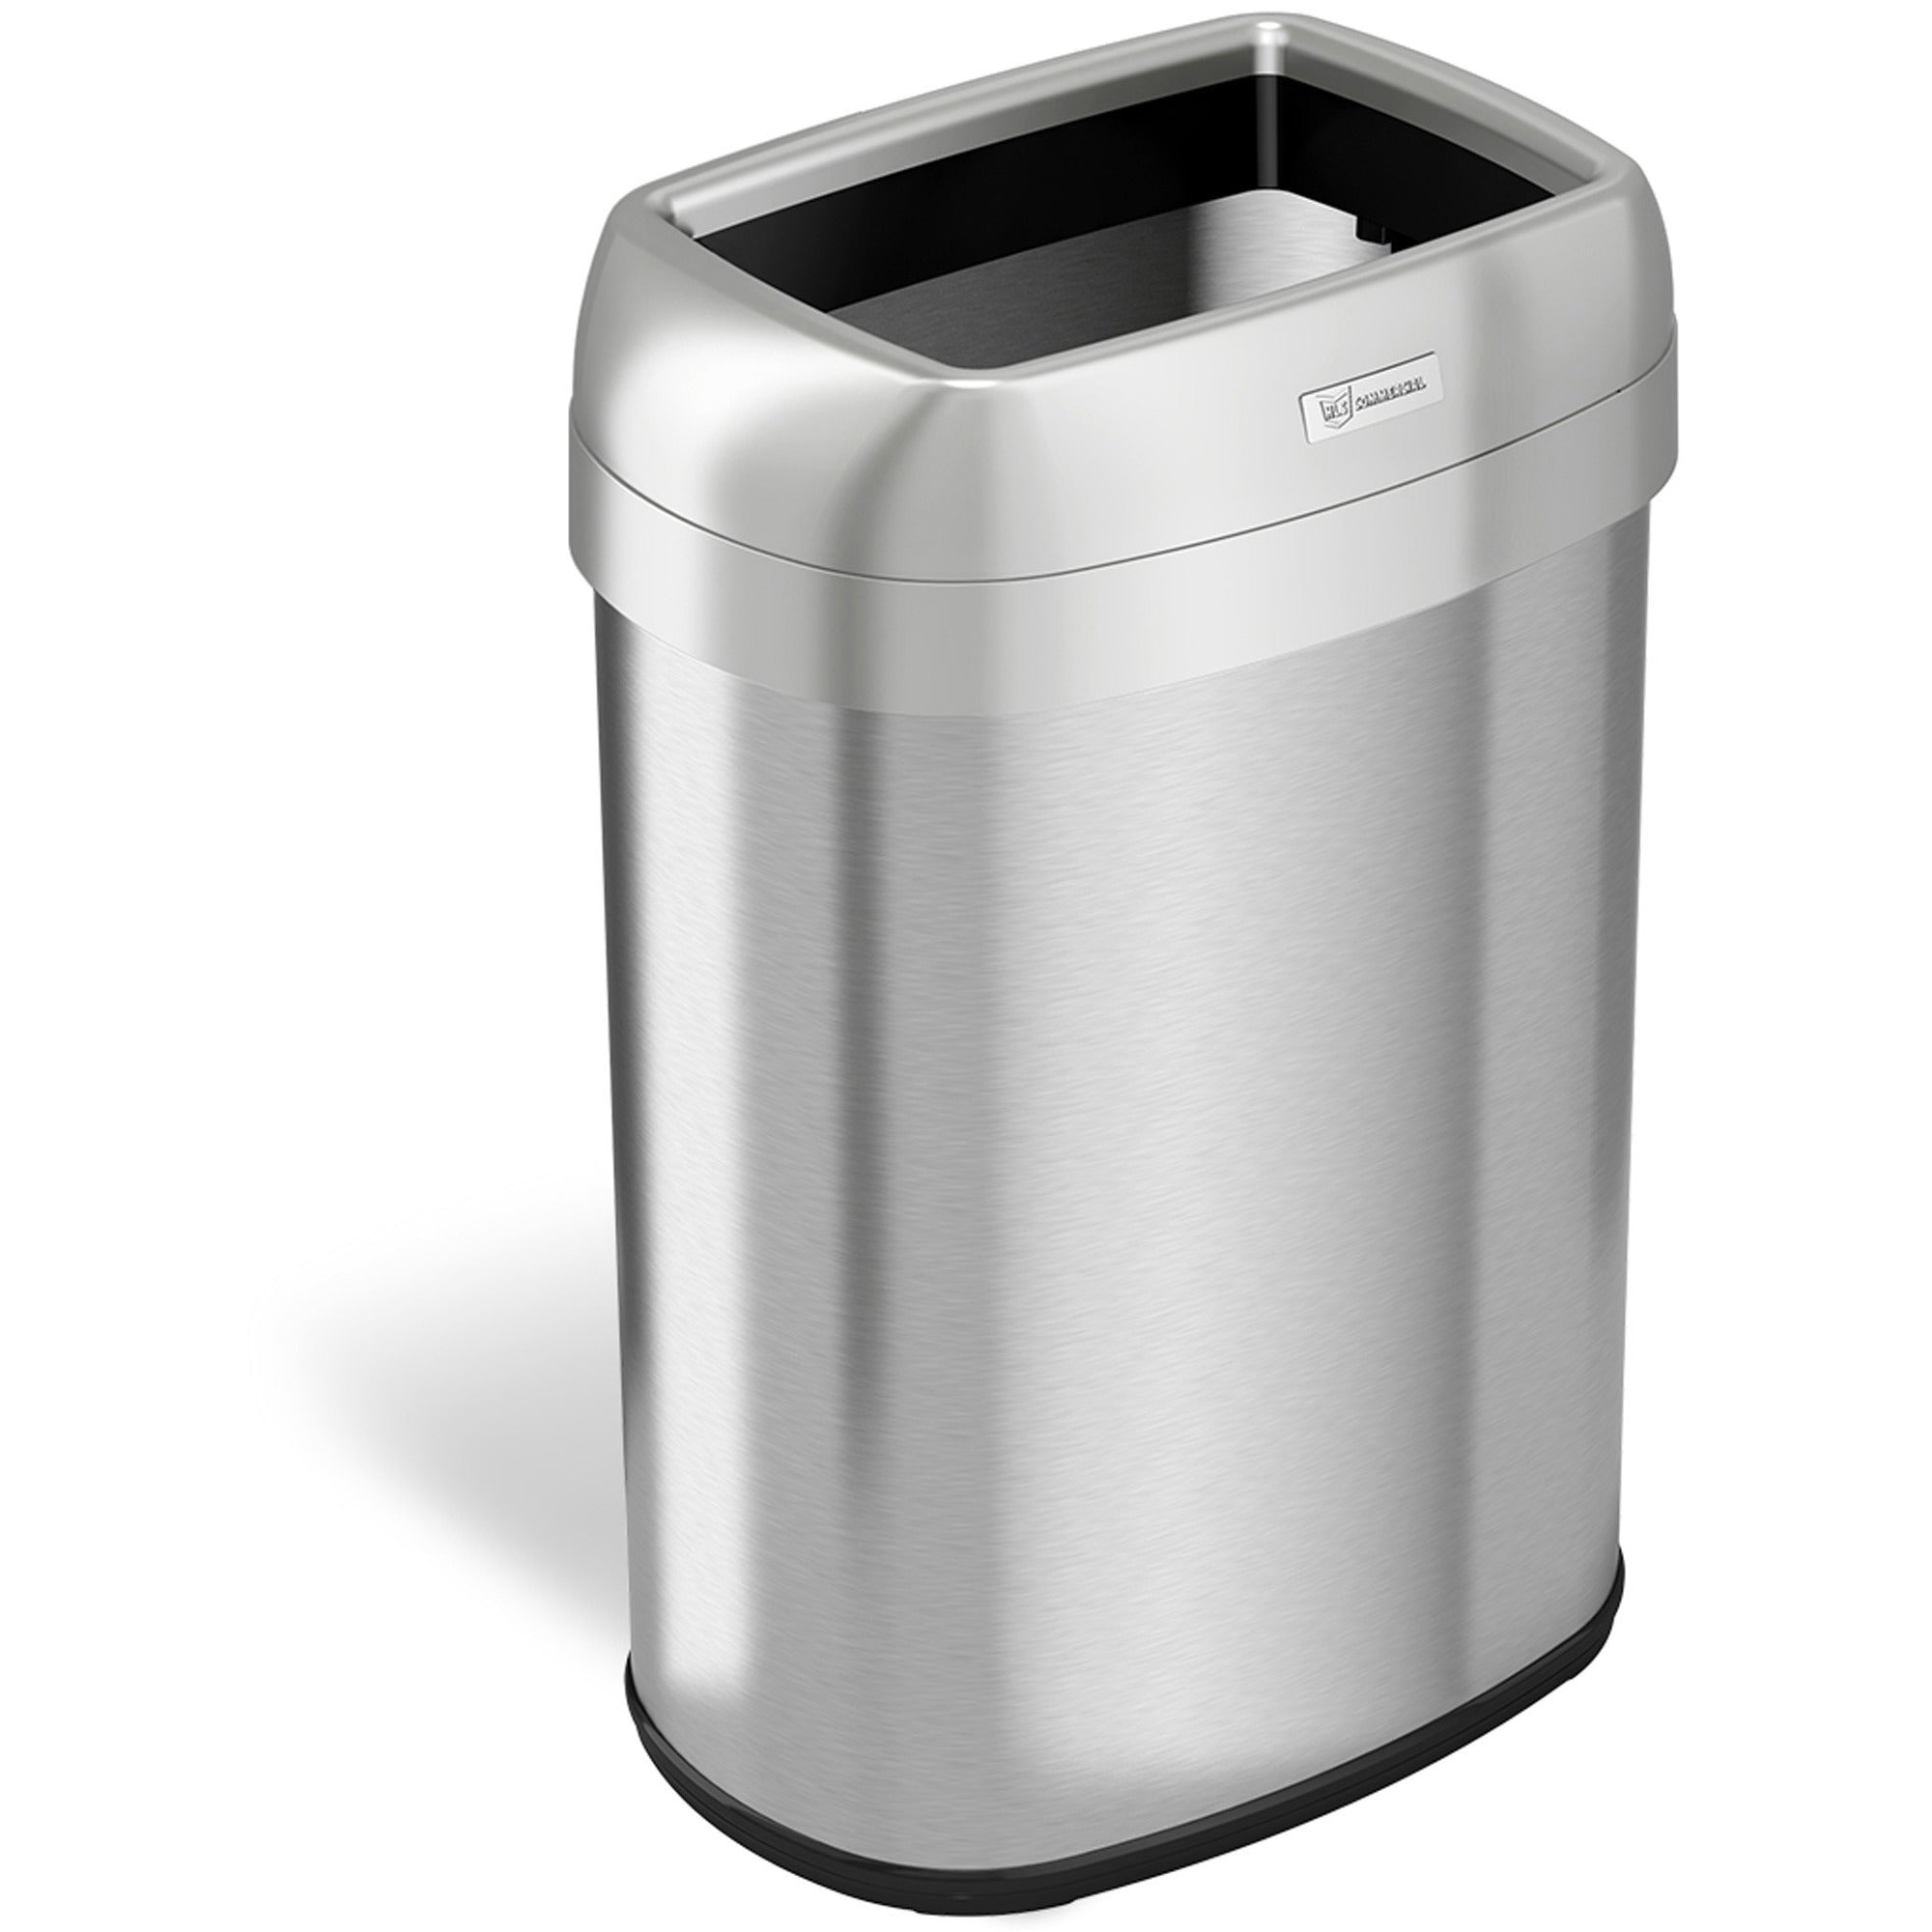 hls-commercial-stainless-steel-open-top-trash-can-13-gal-capacity-elliptical-manual-heavy-duty-fingerprint-resistant-bacteria-resistant-vented-handle-easy-to-clean-243-height-x-115-width-stainless-steel-abs-plastic-gray-1-ea_hlchls13stv - 1